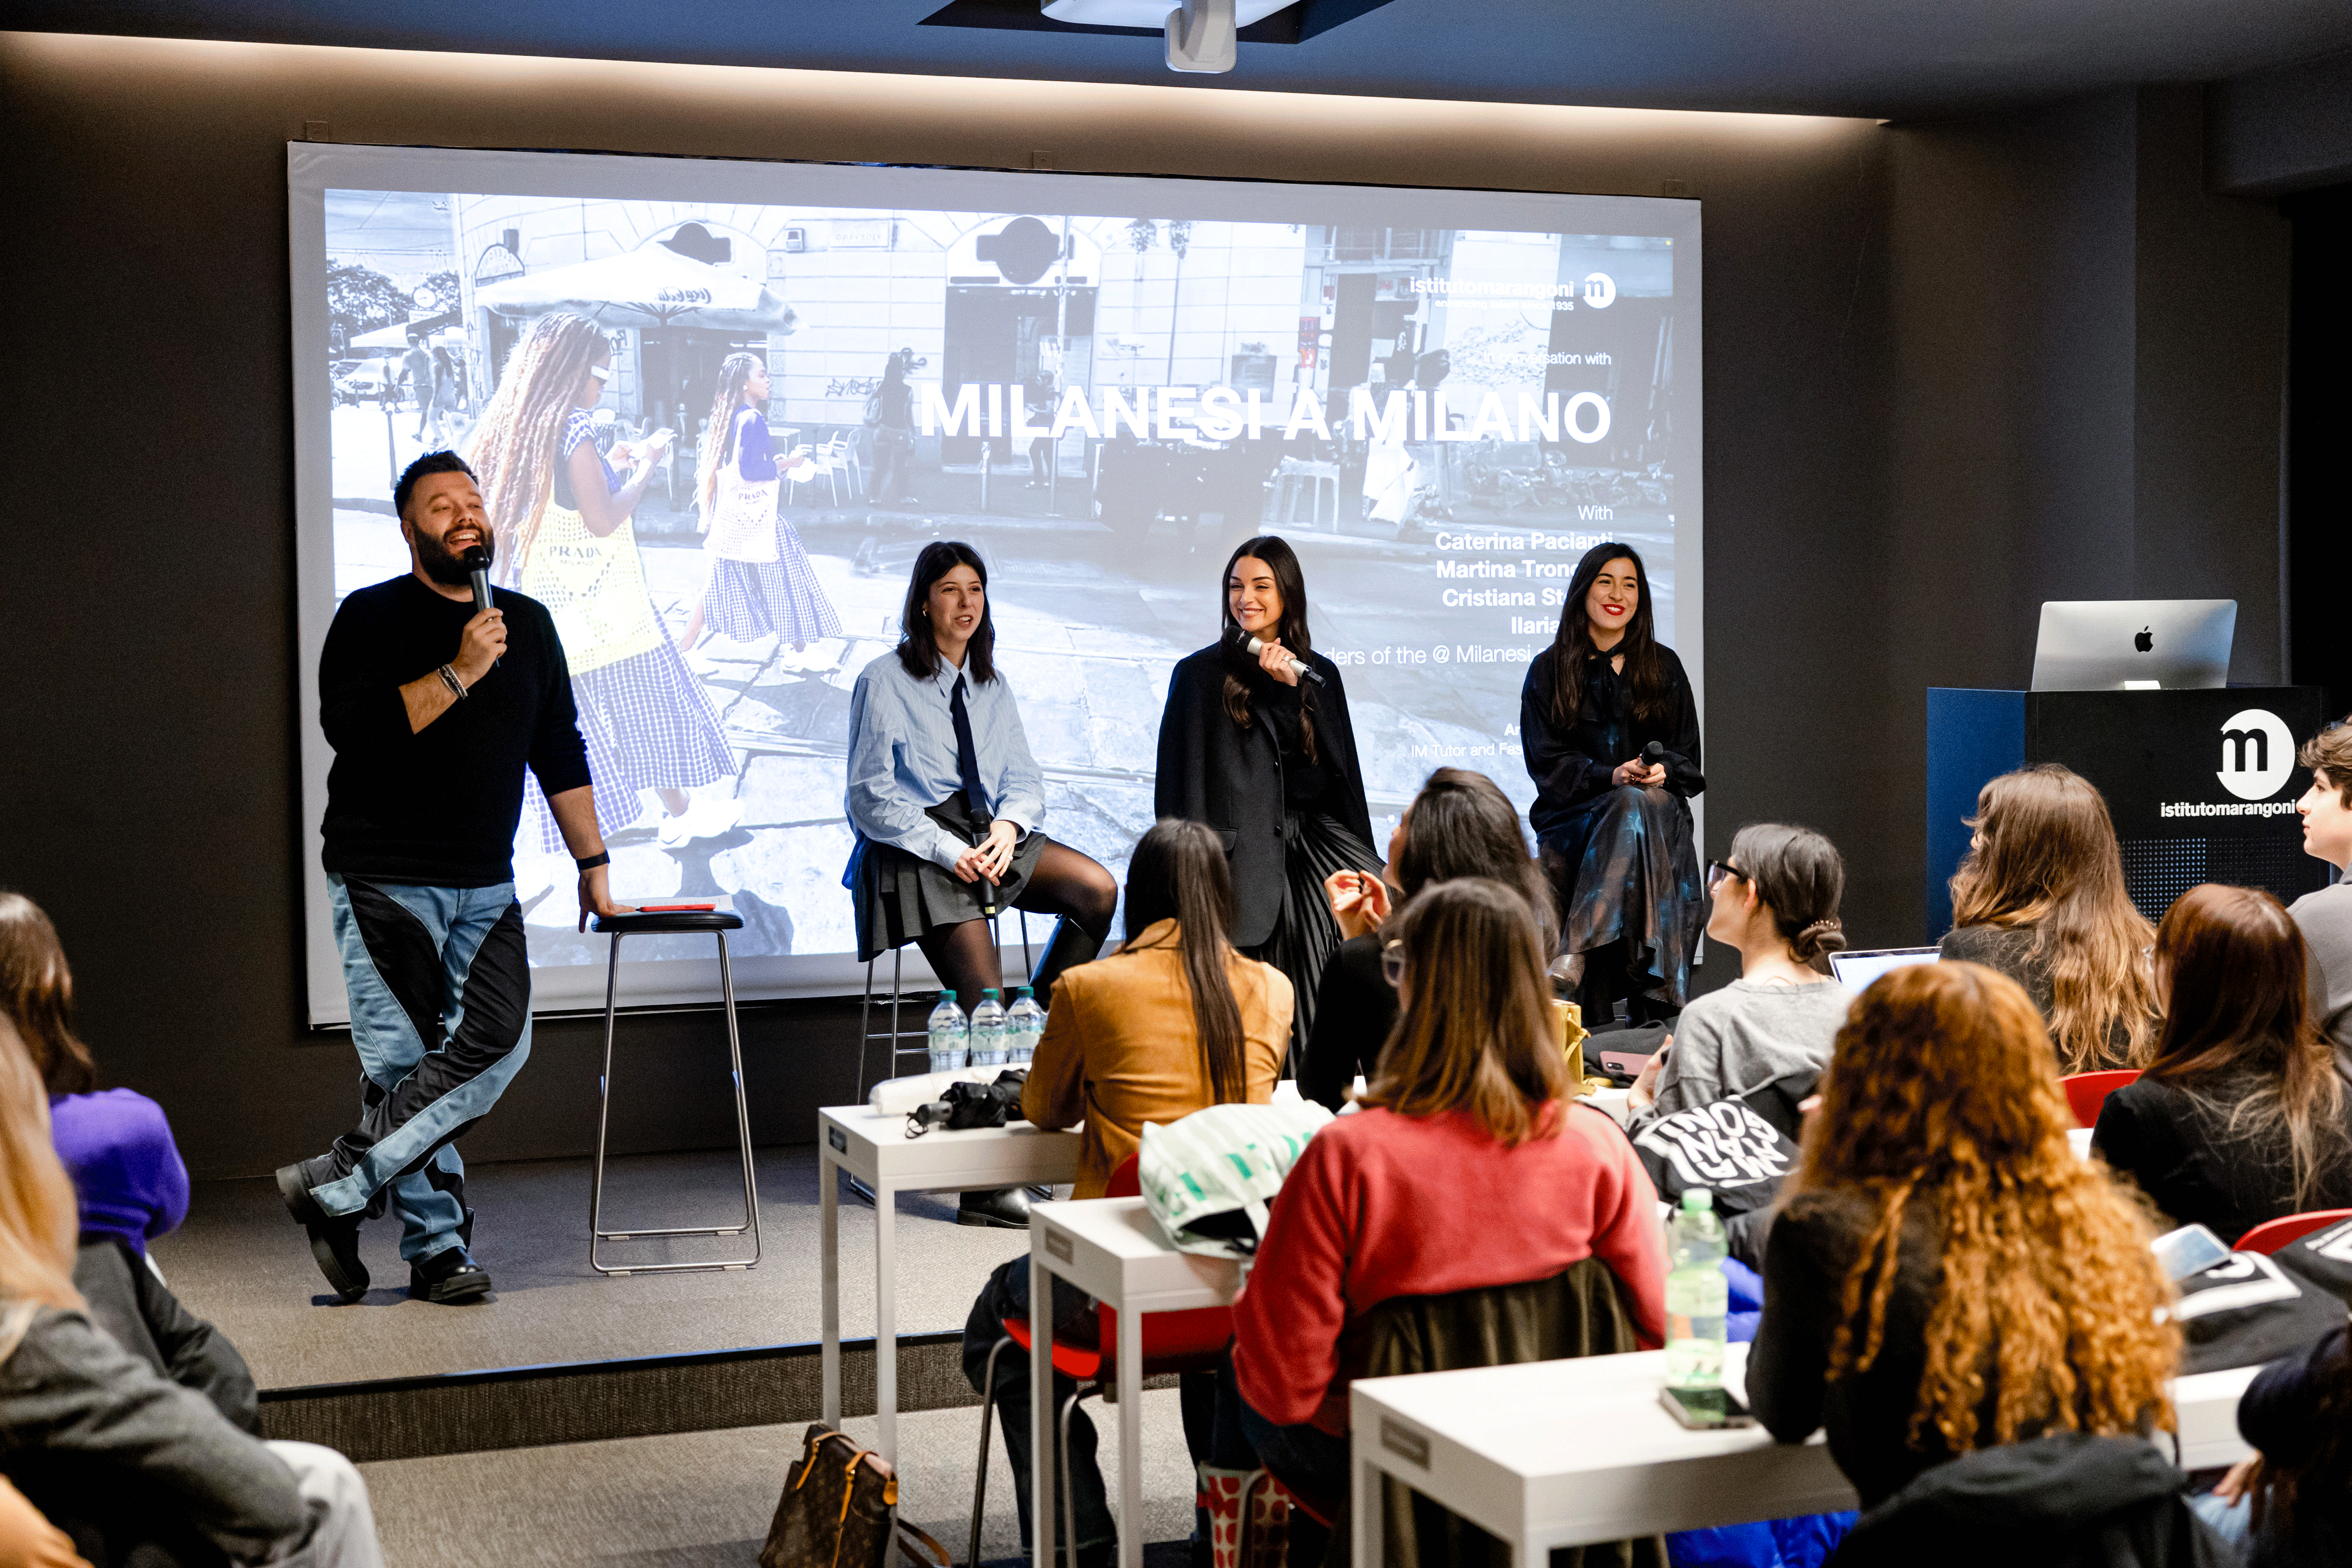 Istituto Marangoni Milano students delving into Instagram insights with the masterminds behind the renowned account @milanesiamilano